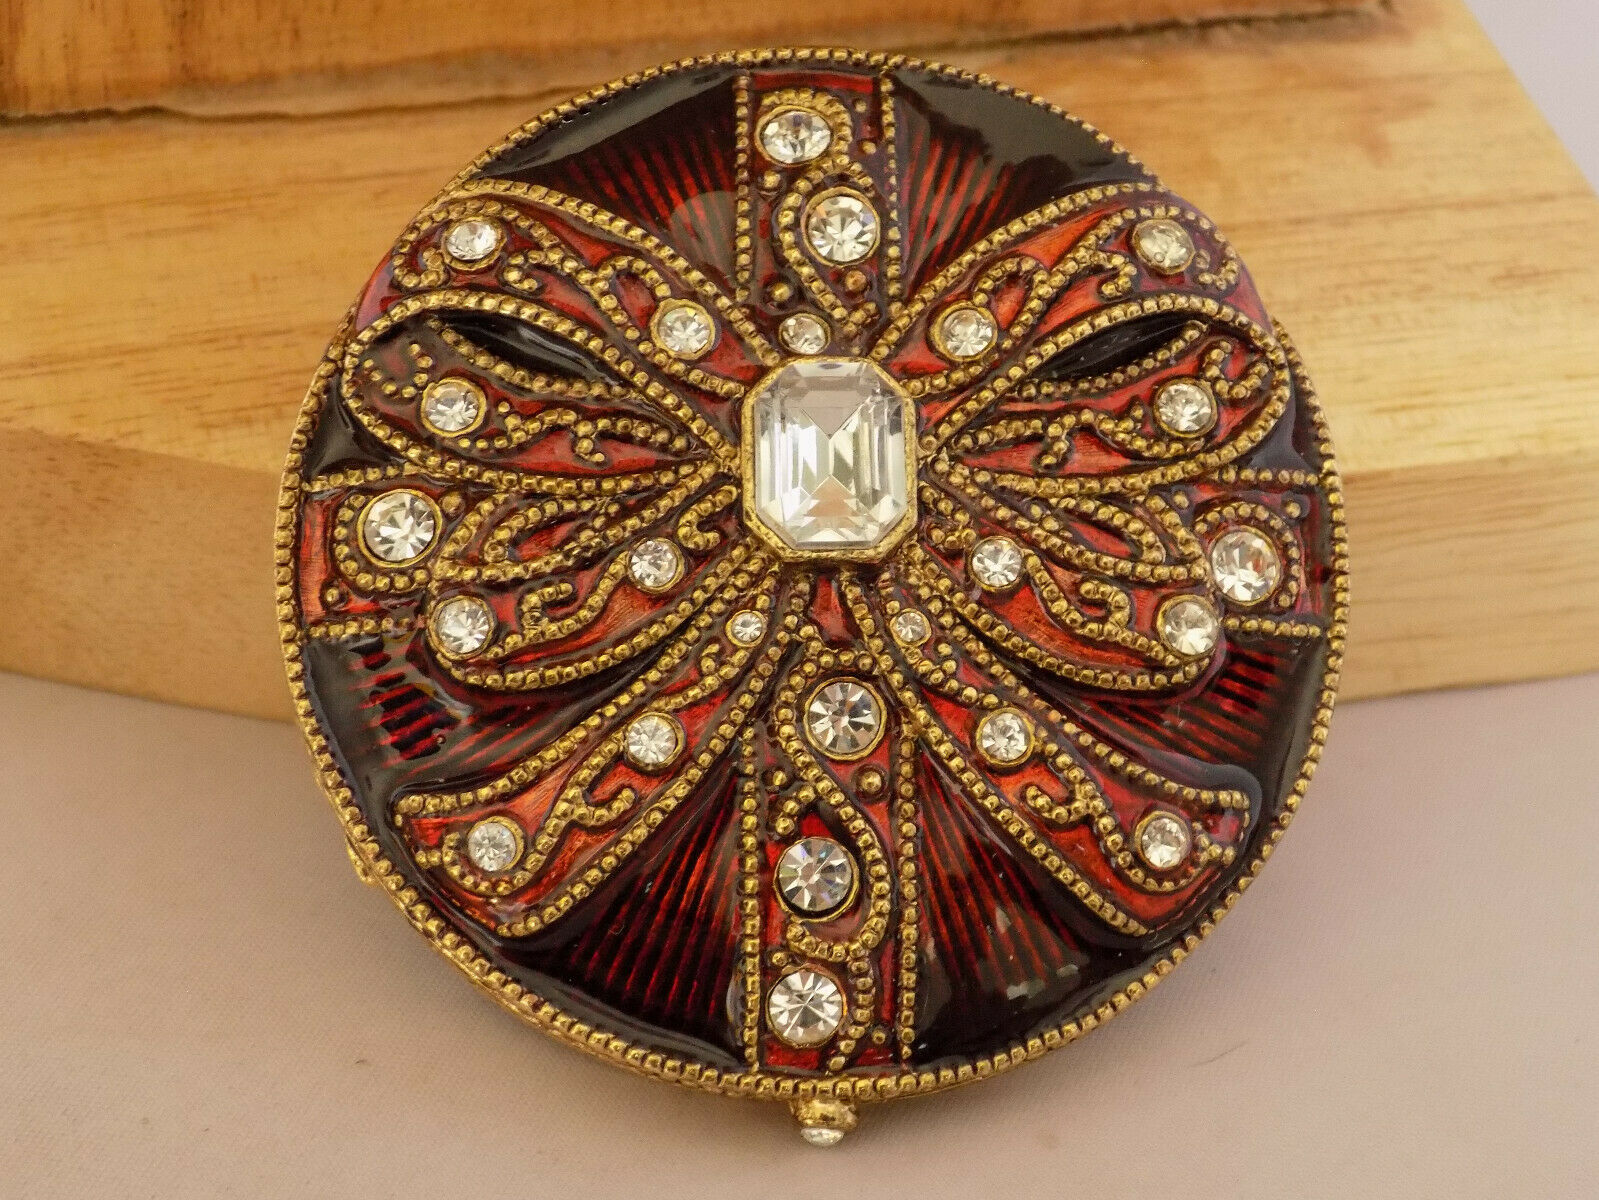 Vintage Monet Compact Dual Mirror Red Maroon Jeweled Enamel Hinged Bow Design